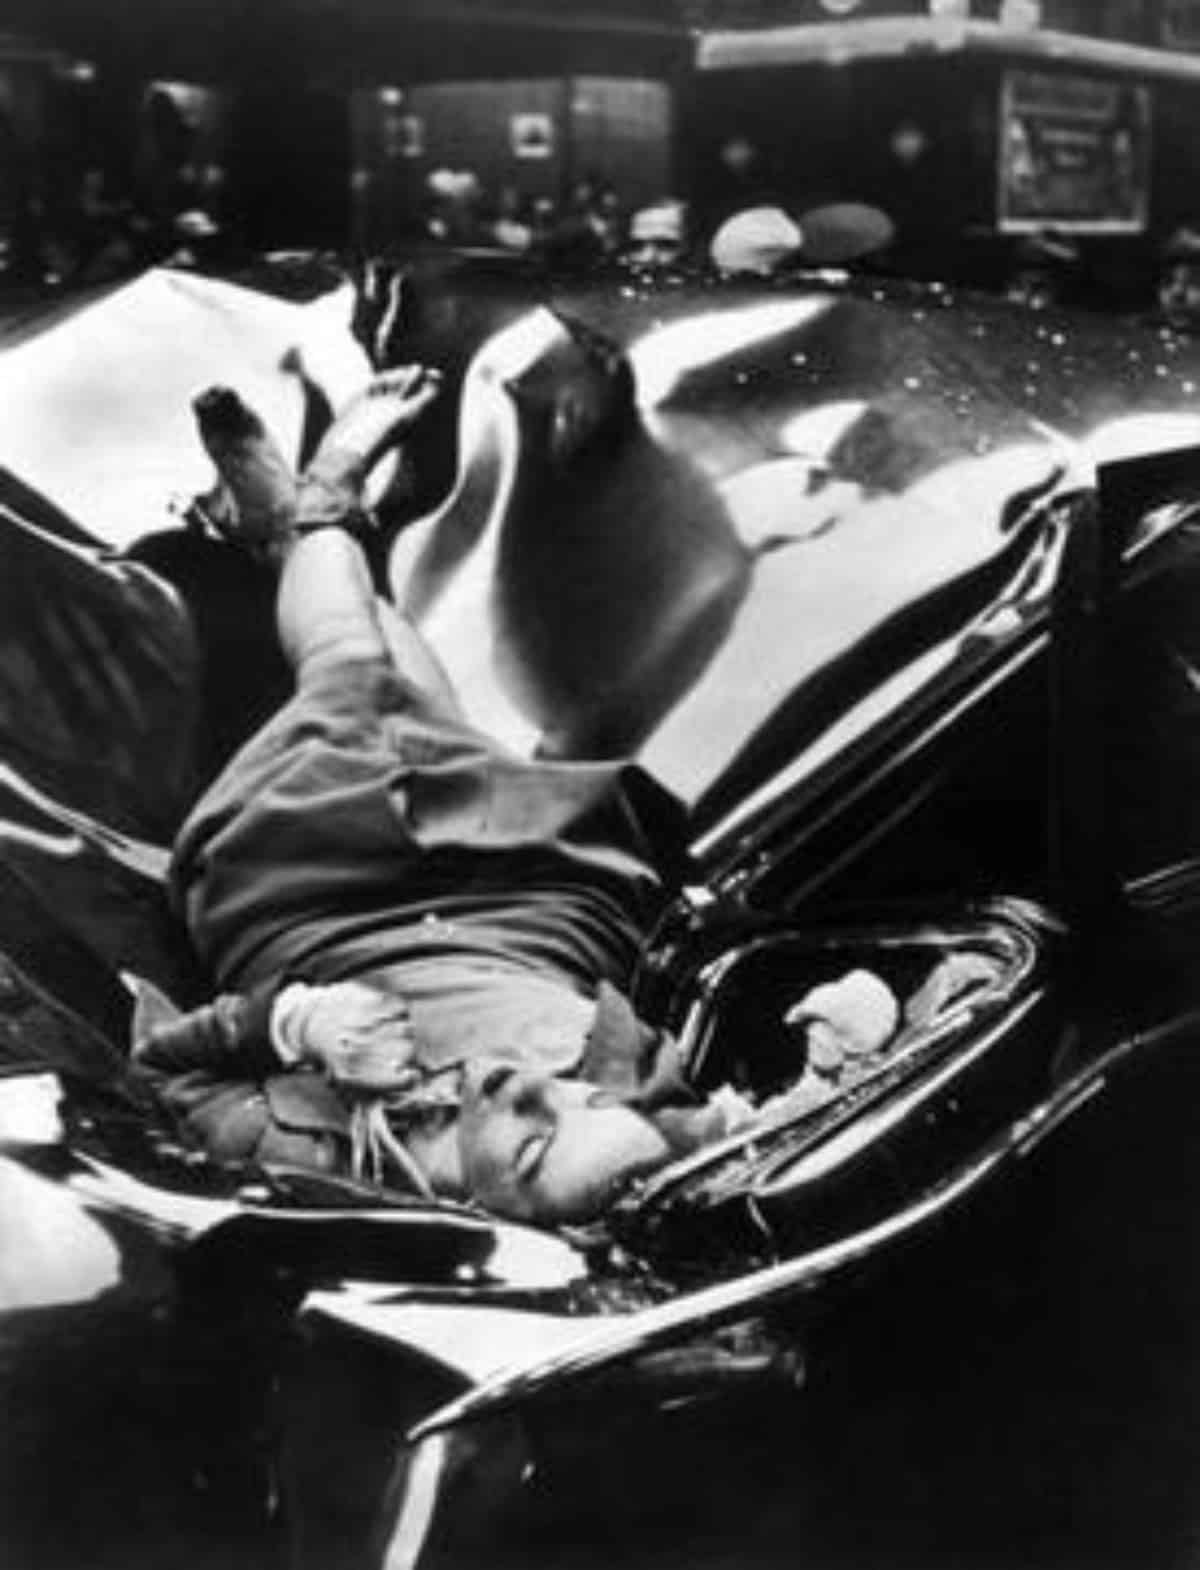 The Most Beautiful Suicide: Evelyn McHale's Tragic Leap